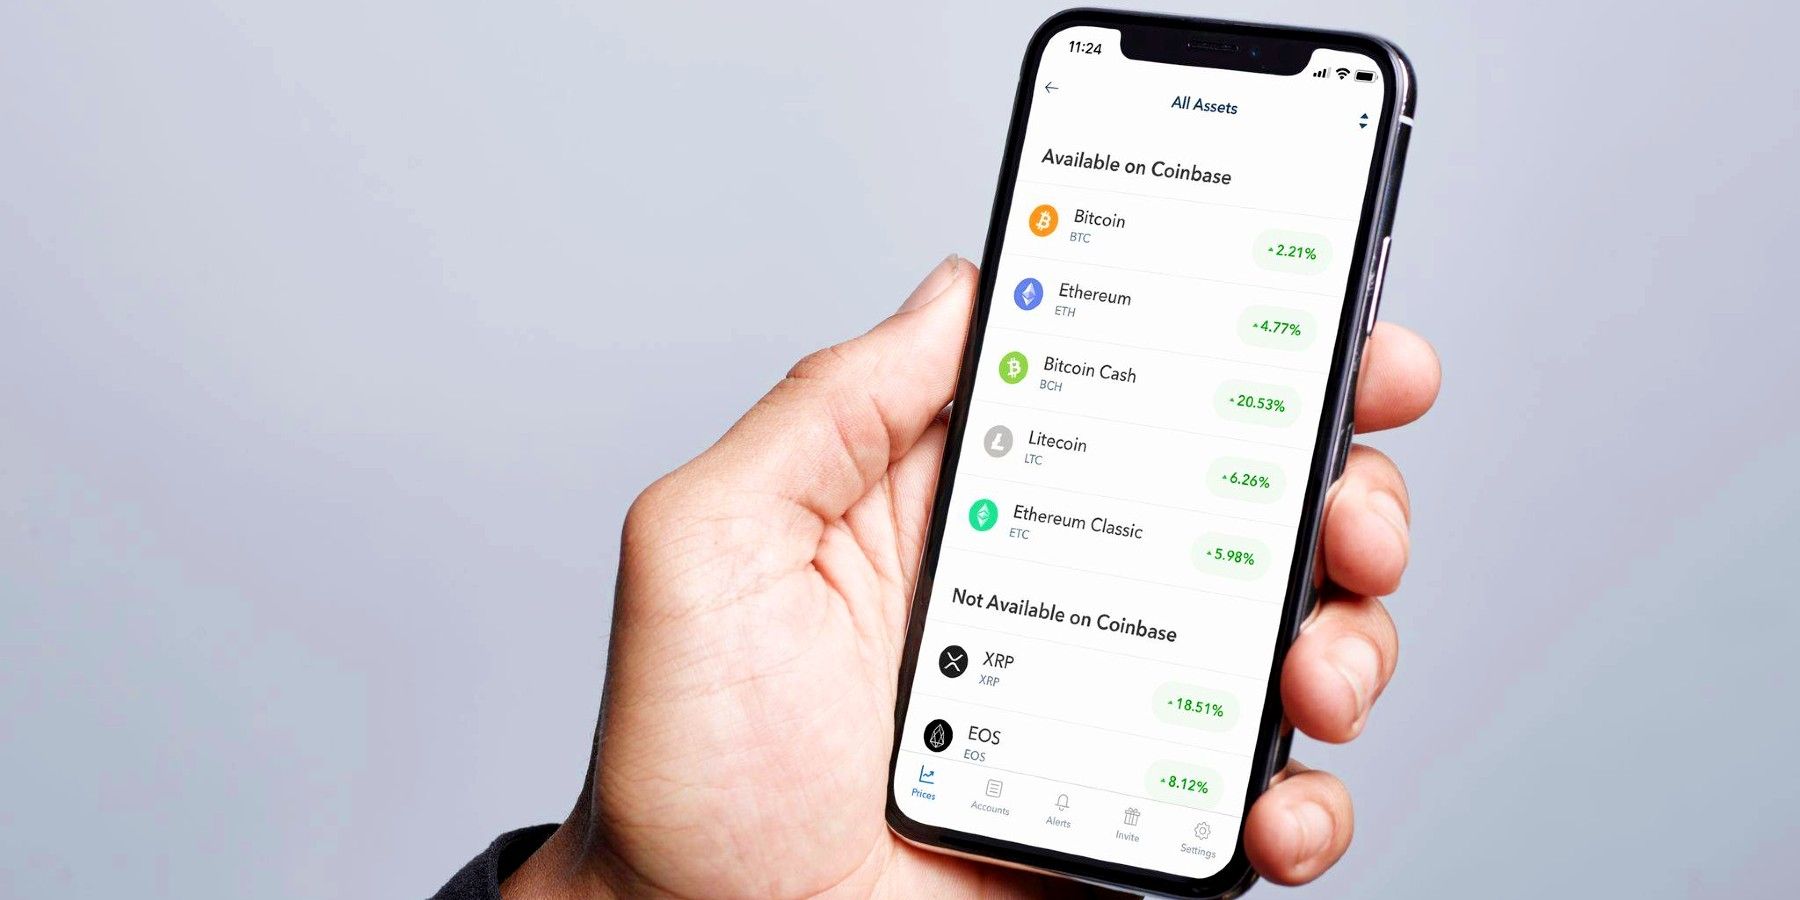 Coinbase App On Mobile Device